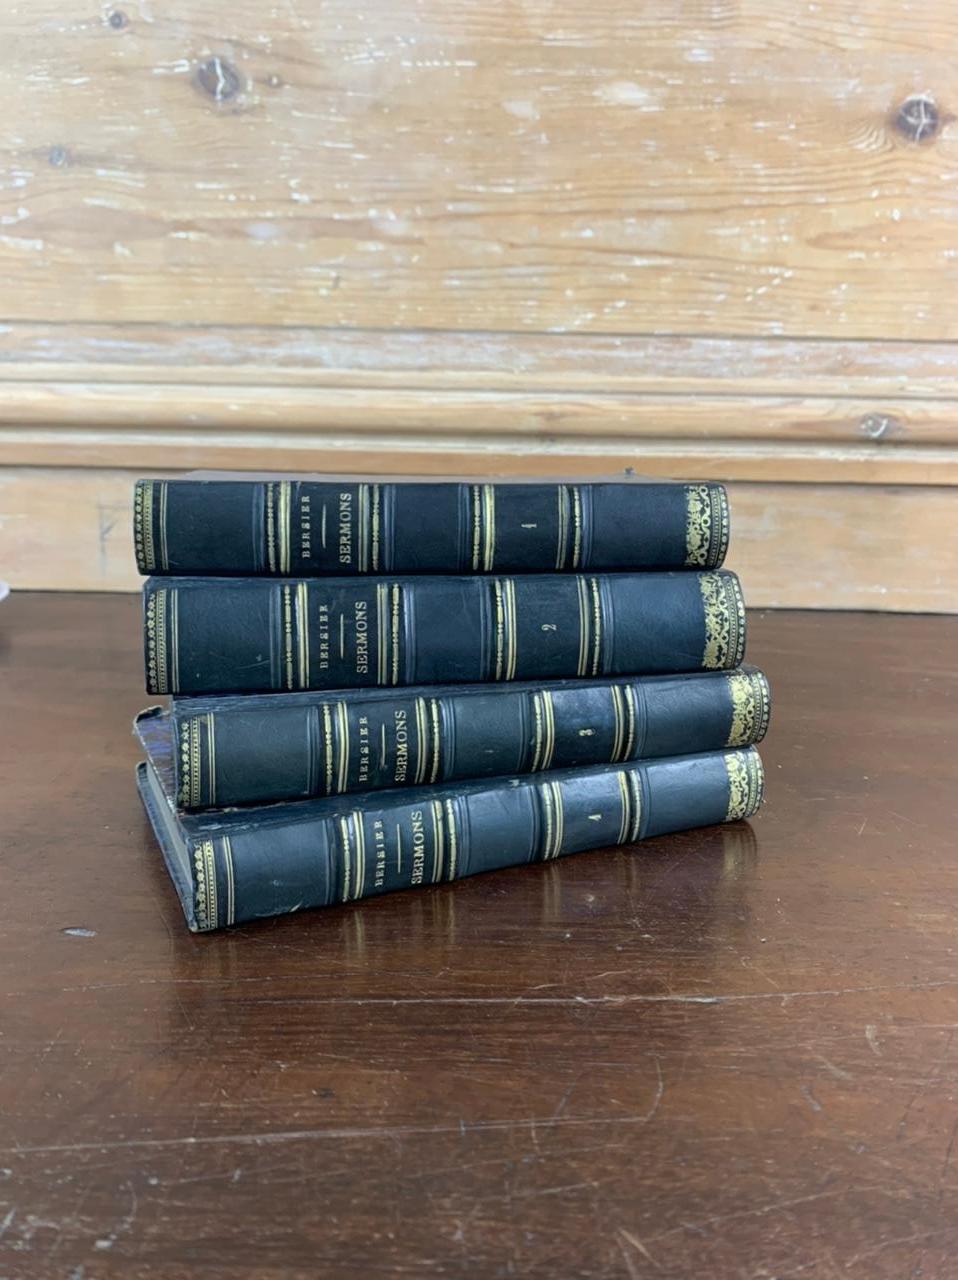 Set of old religious books dating from the 19th century. From an old protestant library near Le Havre in France. These books are called 